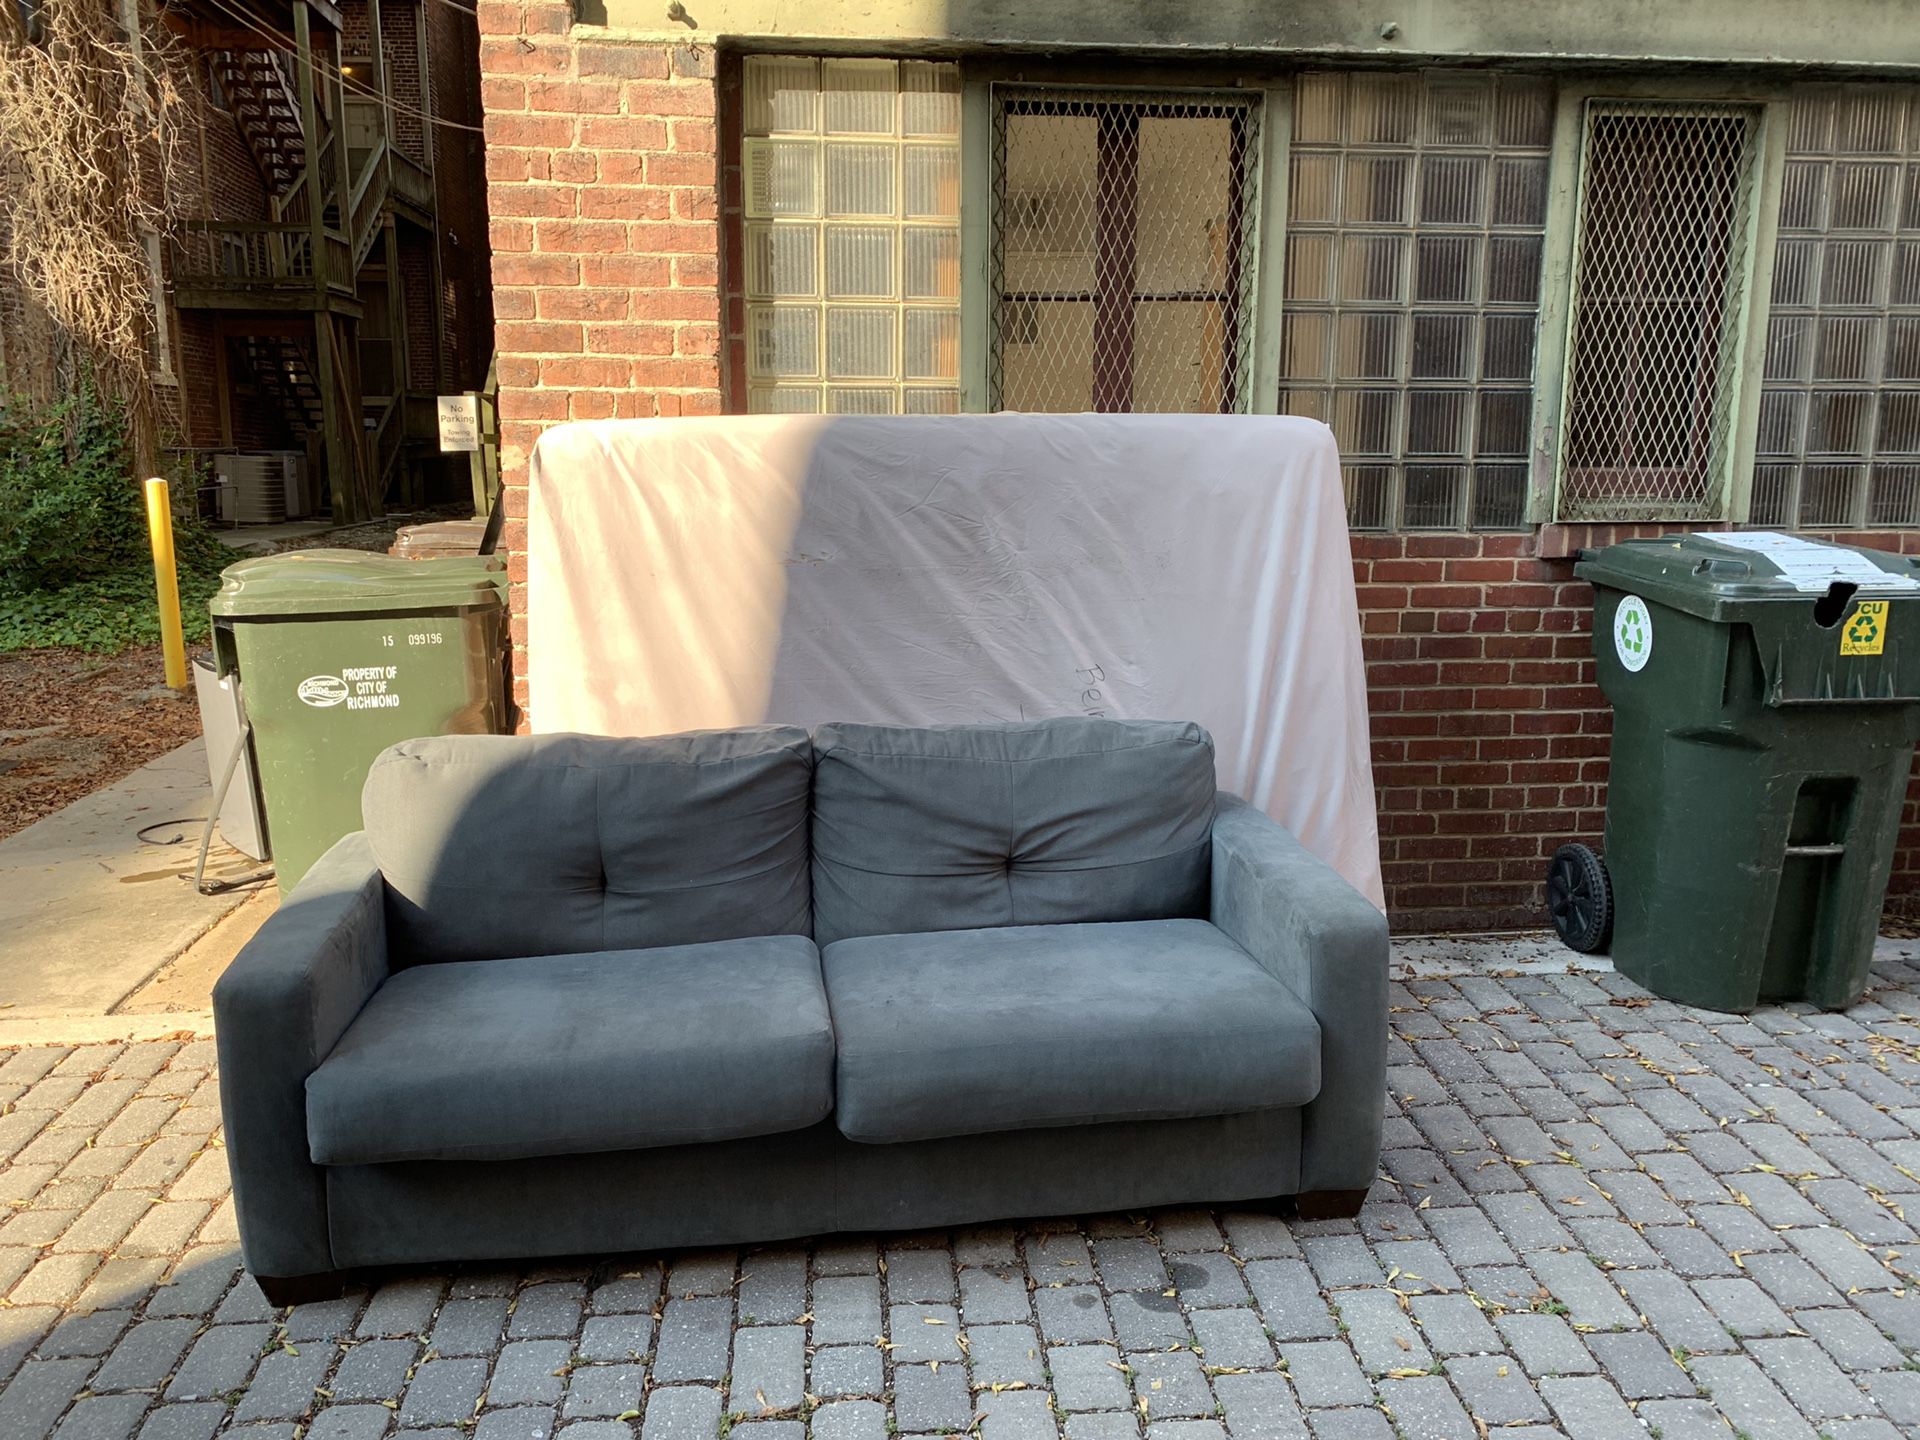 Free couch and queen mattress